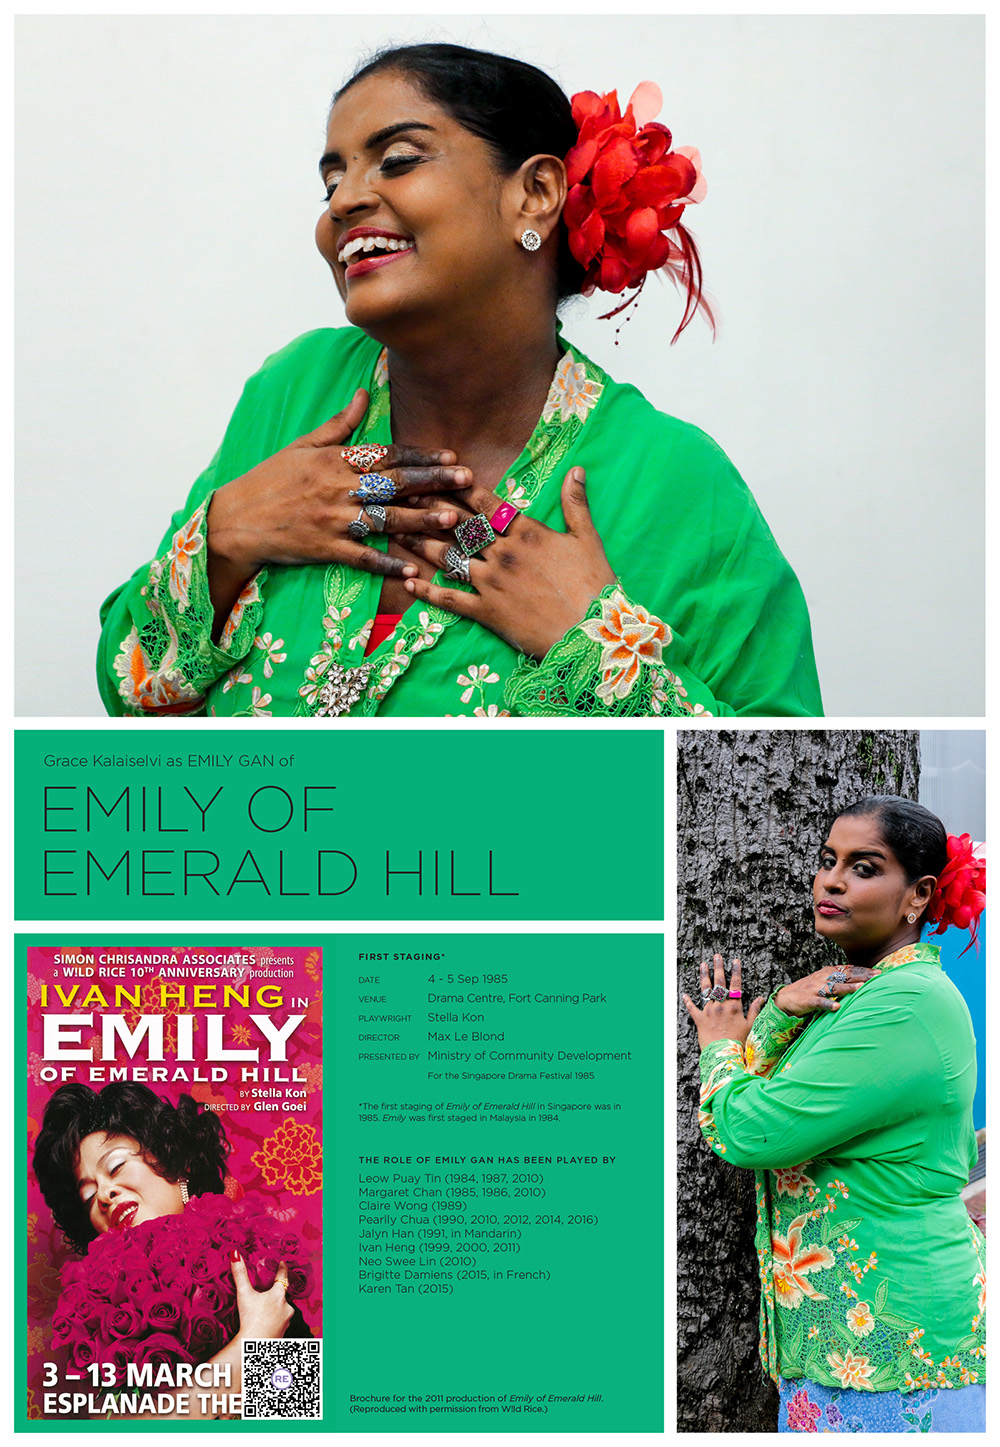 The top half of the poster features an ethnic Indian woman dressed in a green Peranakan blouse with fingers adorned with elaborate rings. The bottom half features the history of staging Emily of Emerald Hill.